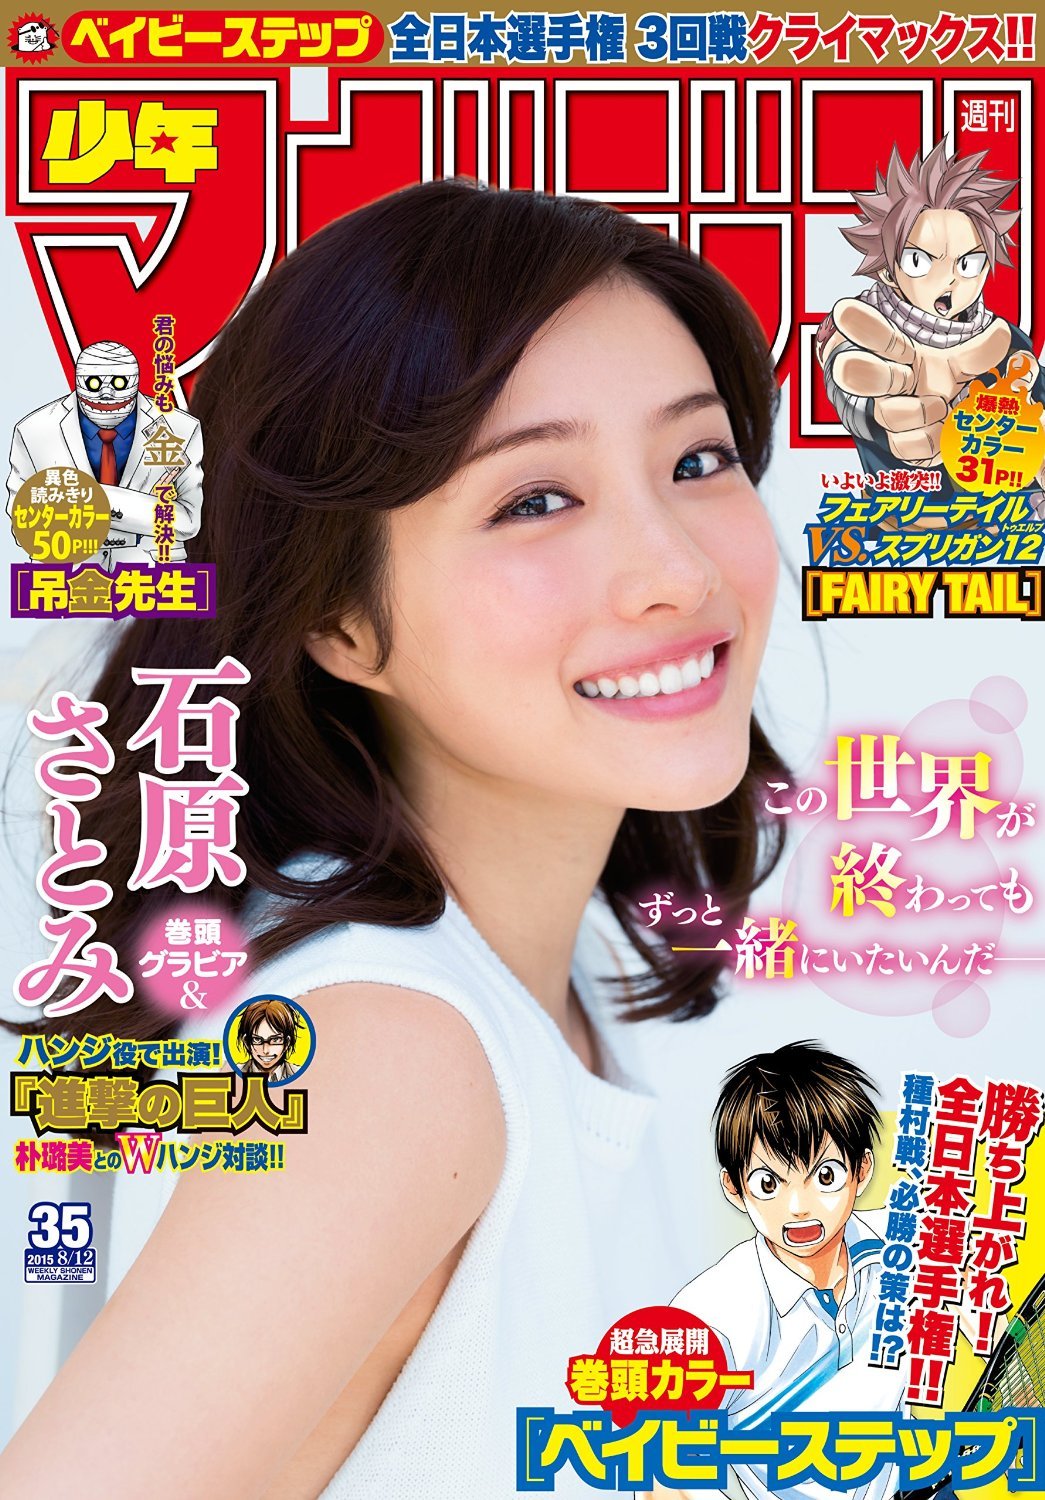 Ishihara Satomi (SnK live action’s Hanji) covers the August 12th, 2015 (#35) issue